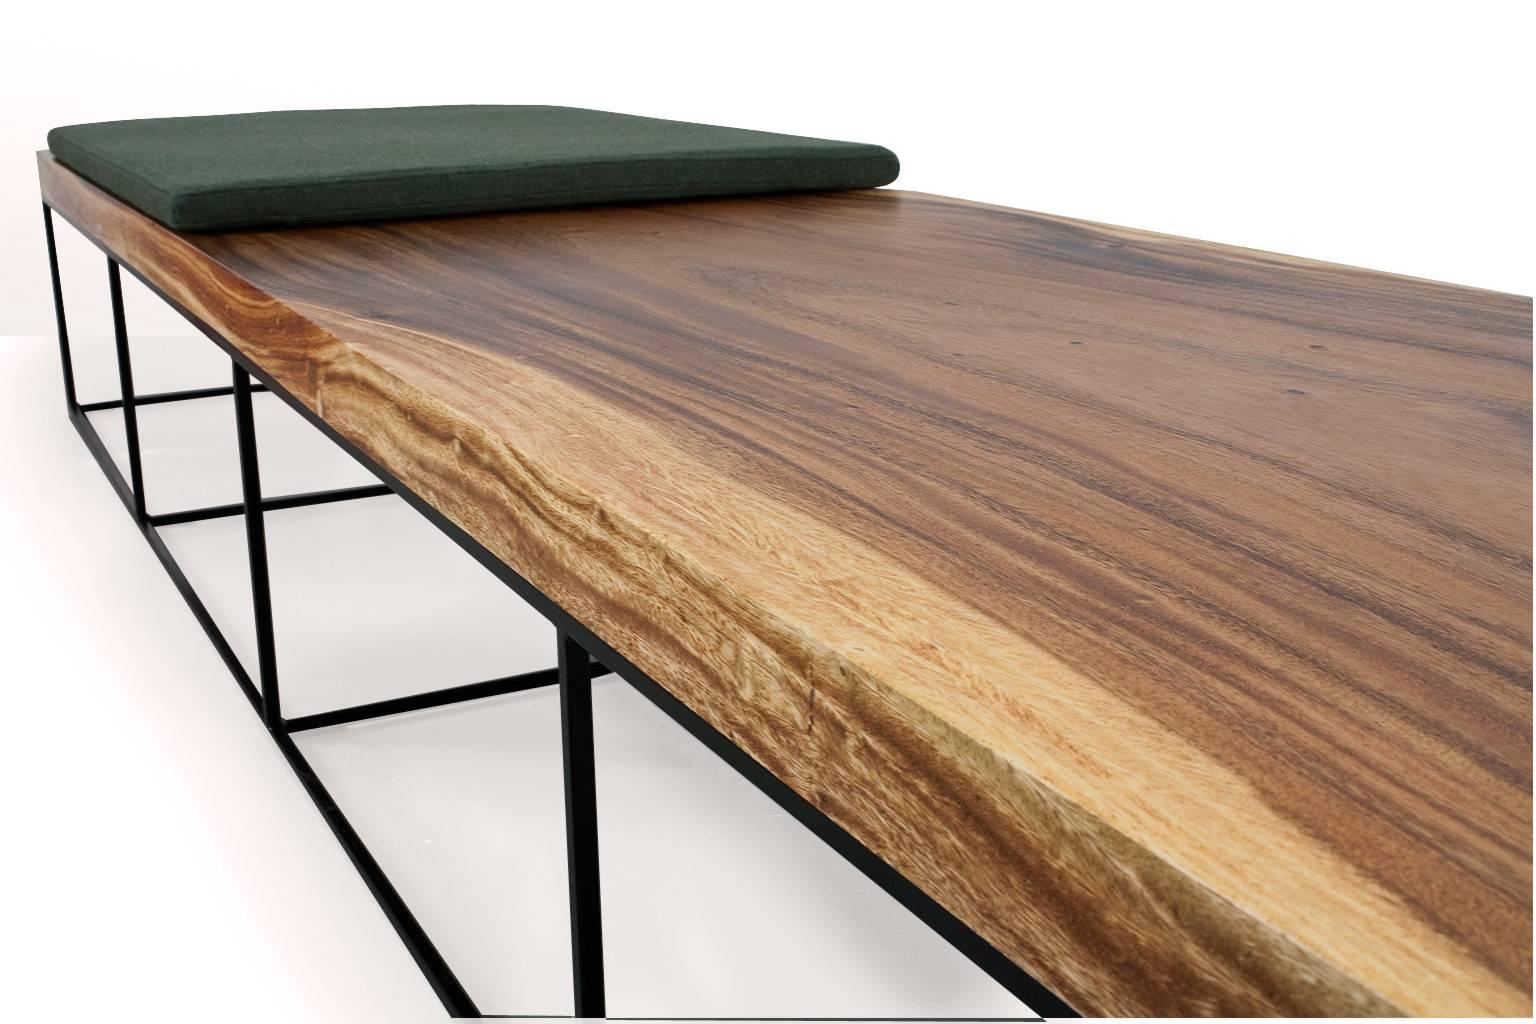 Indonesian Long Wooden Suar Coffee Table or Bench, Organic Contemporary Modern Design